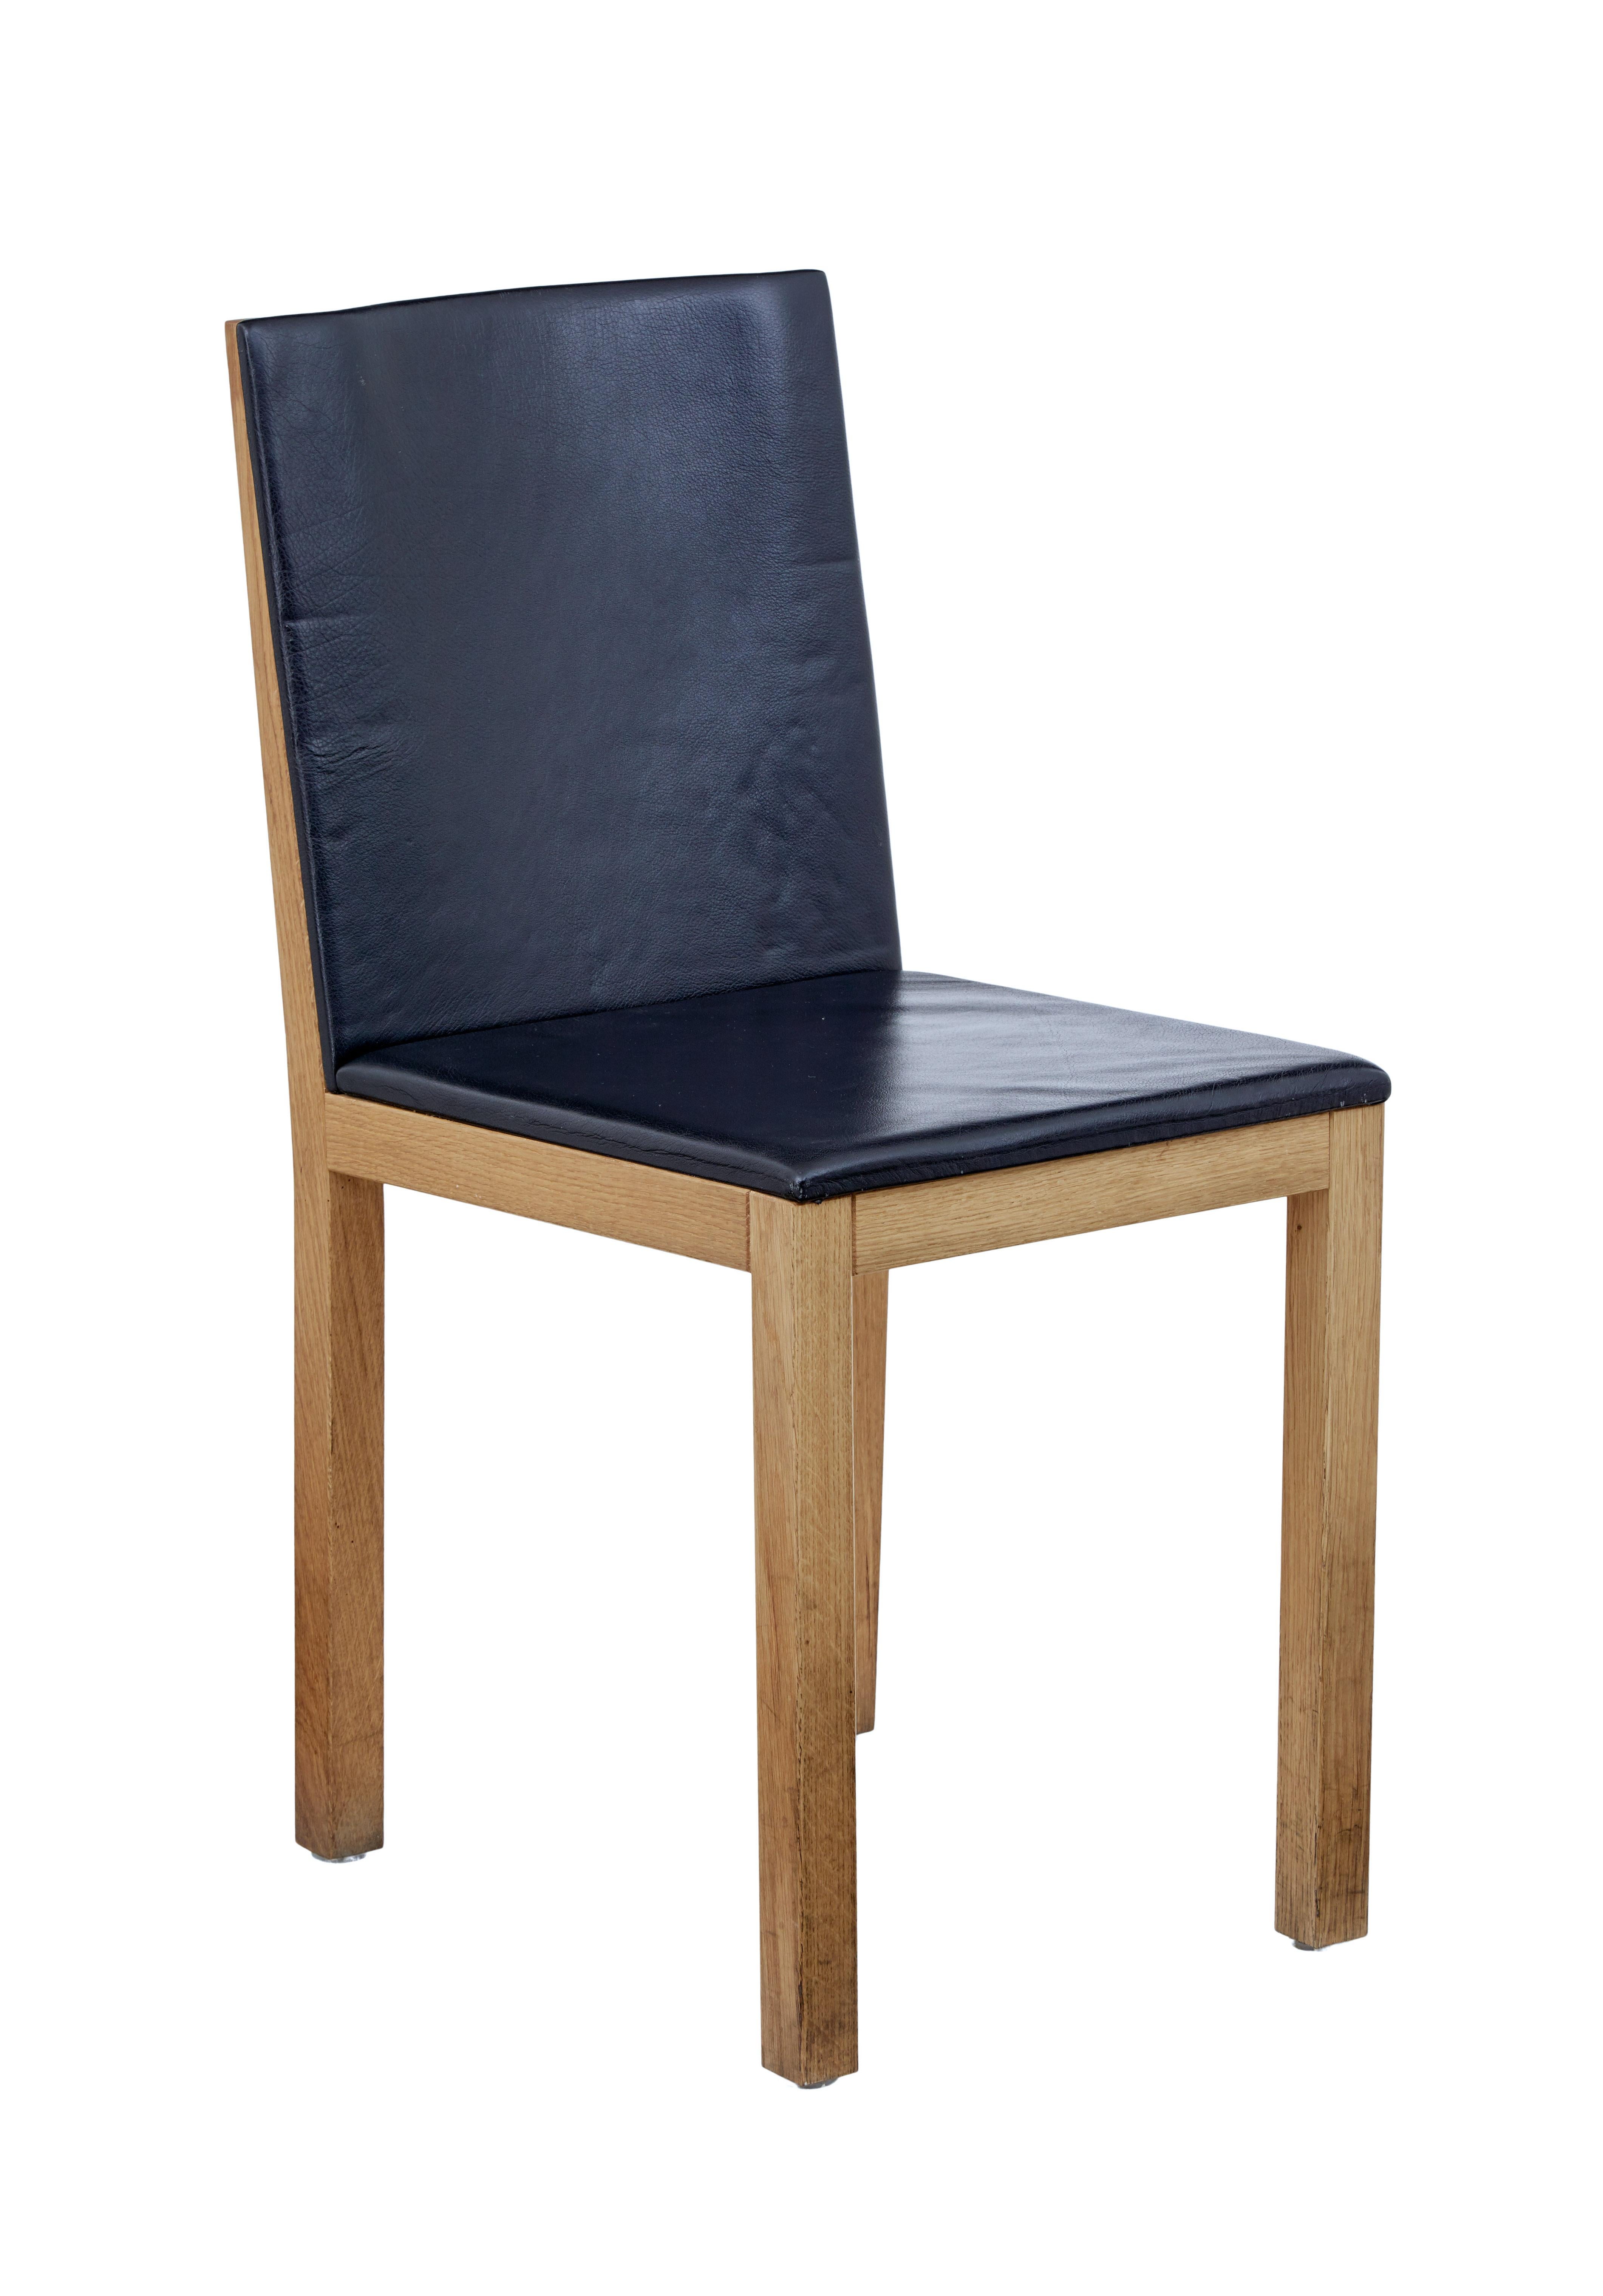 Set of 6 oak and leather Scandinavian dining chairs by Gemla, circa 2001.

Good quality set of dining chairs by well respected furniture makers Gemla, who have been in business since 1861 in Sweden, using sustainable material.

These set of